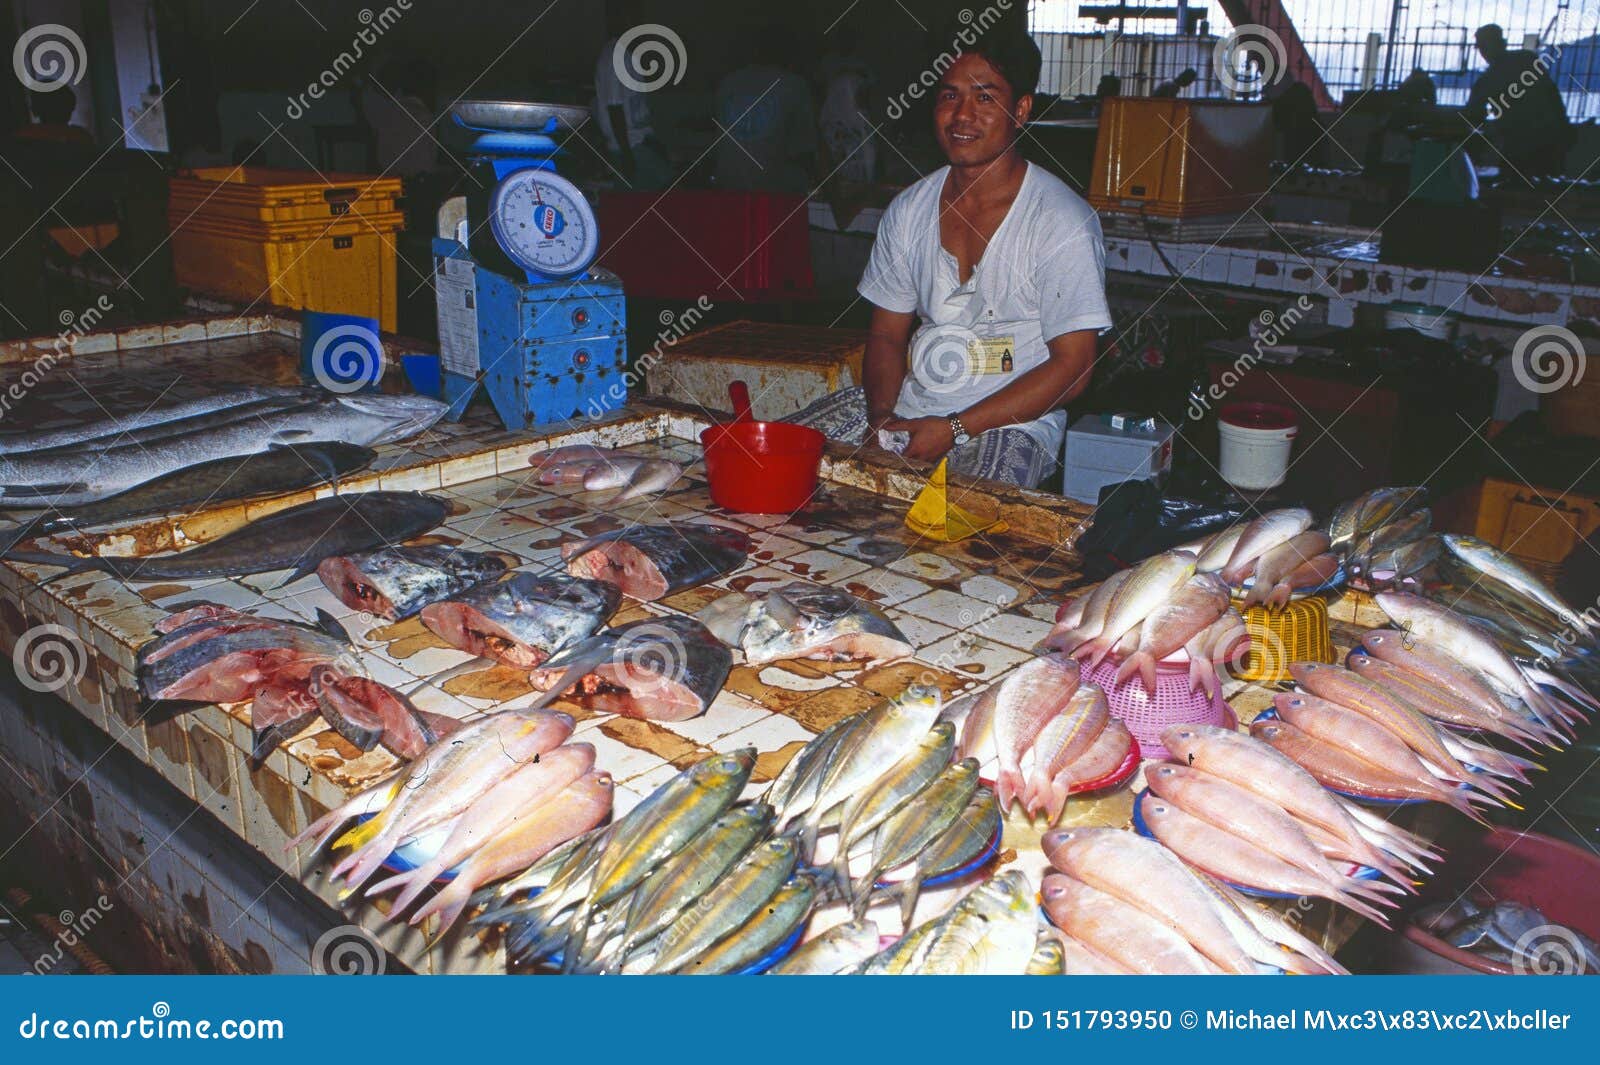 Malaysia: a Fish Stand in the Market of Kota Kinabalu in Sabah